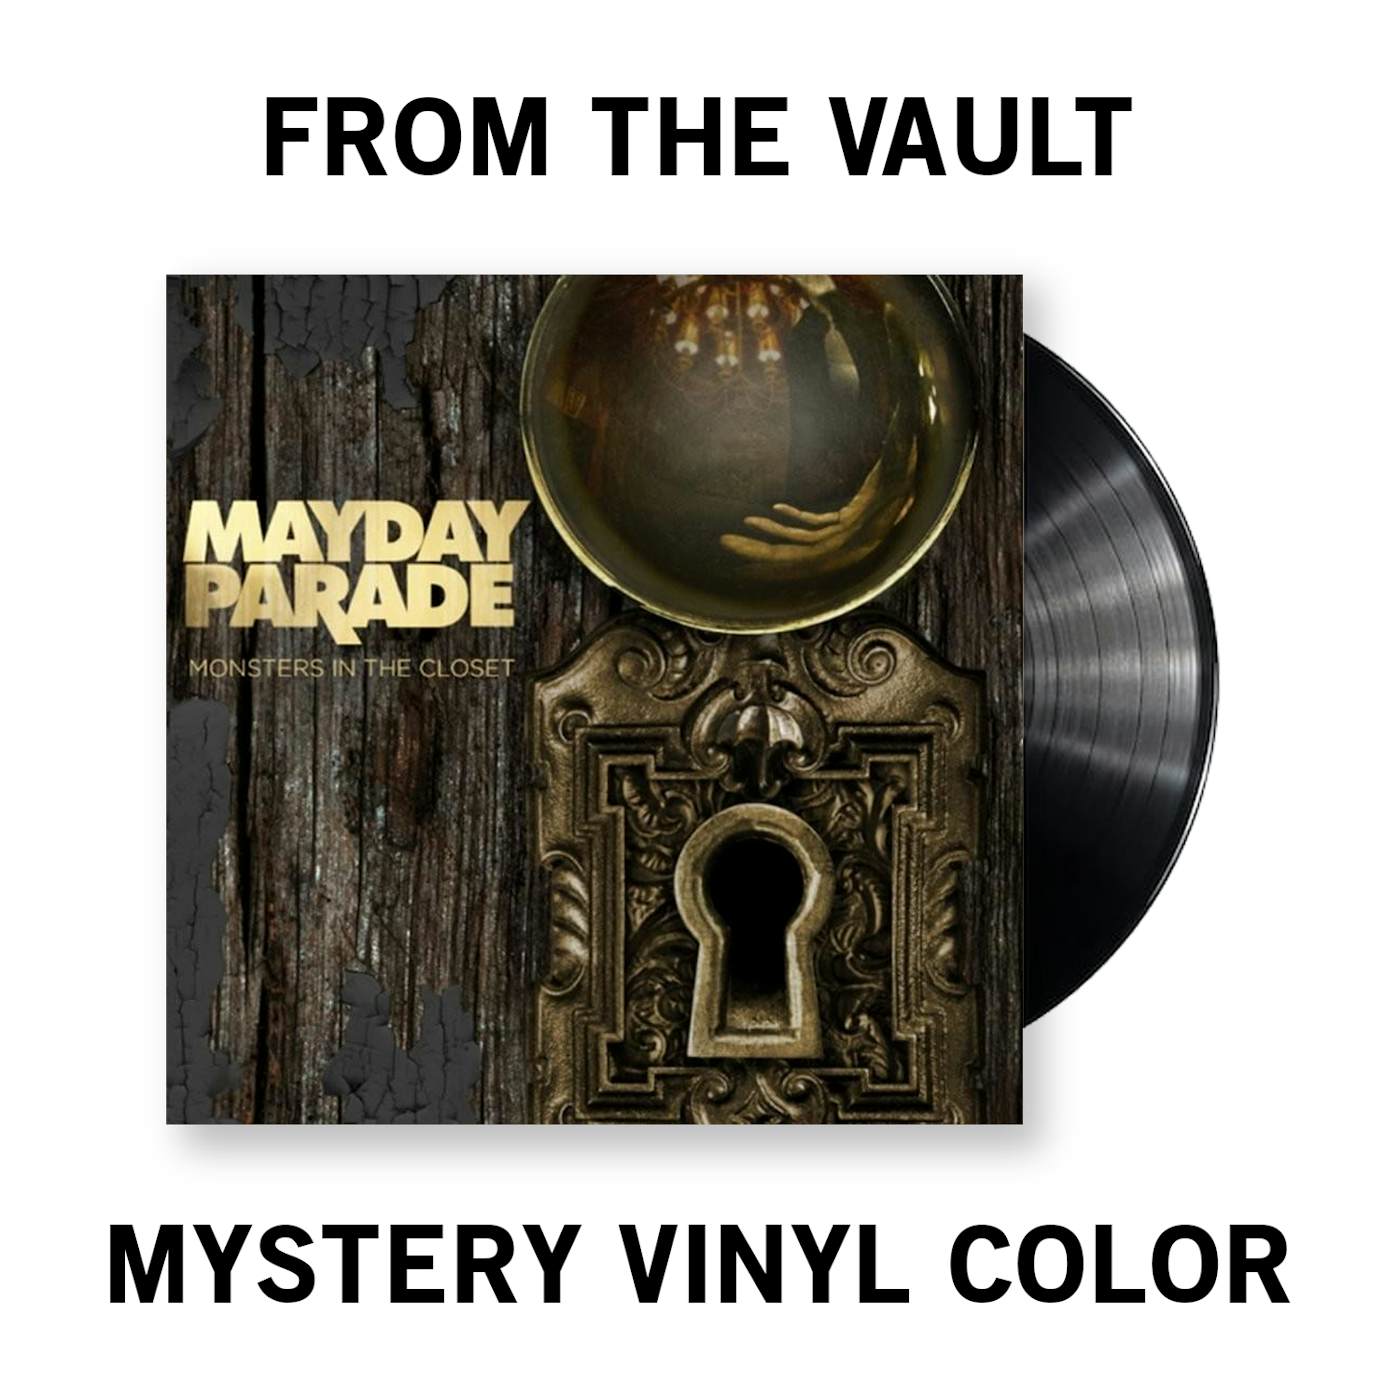 Mayday Parade Monsters in the Closet Vinyl